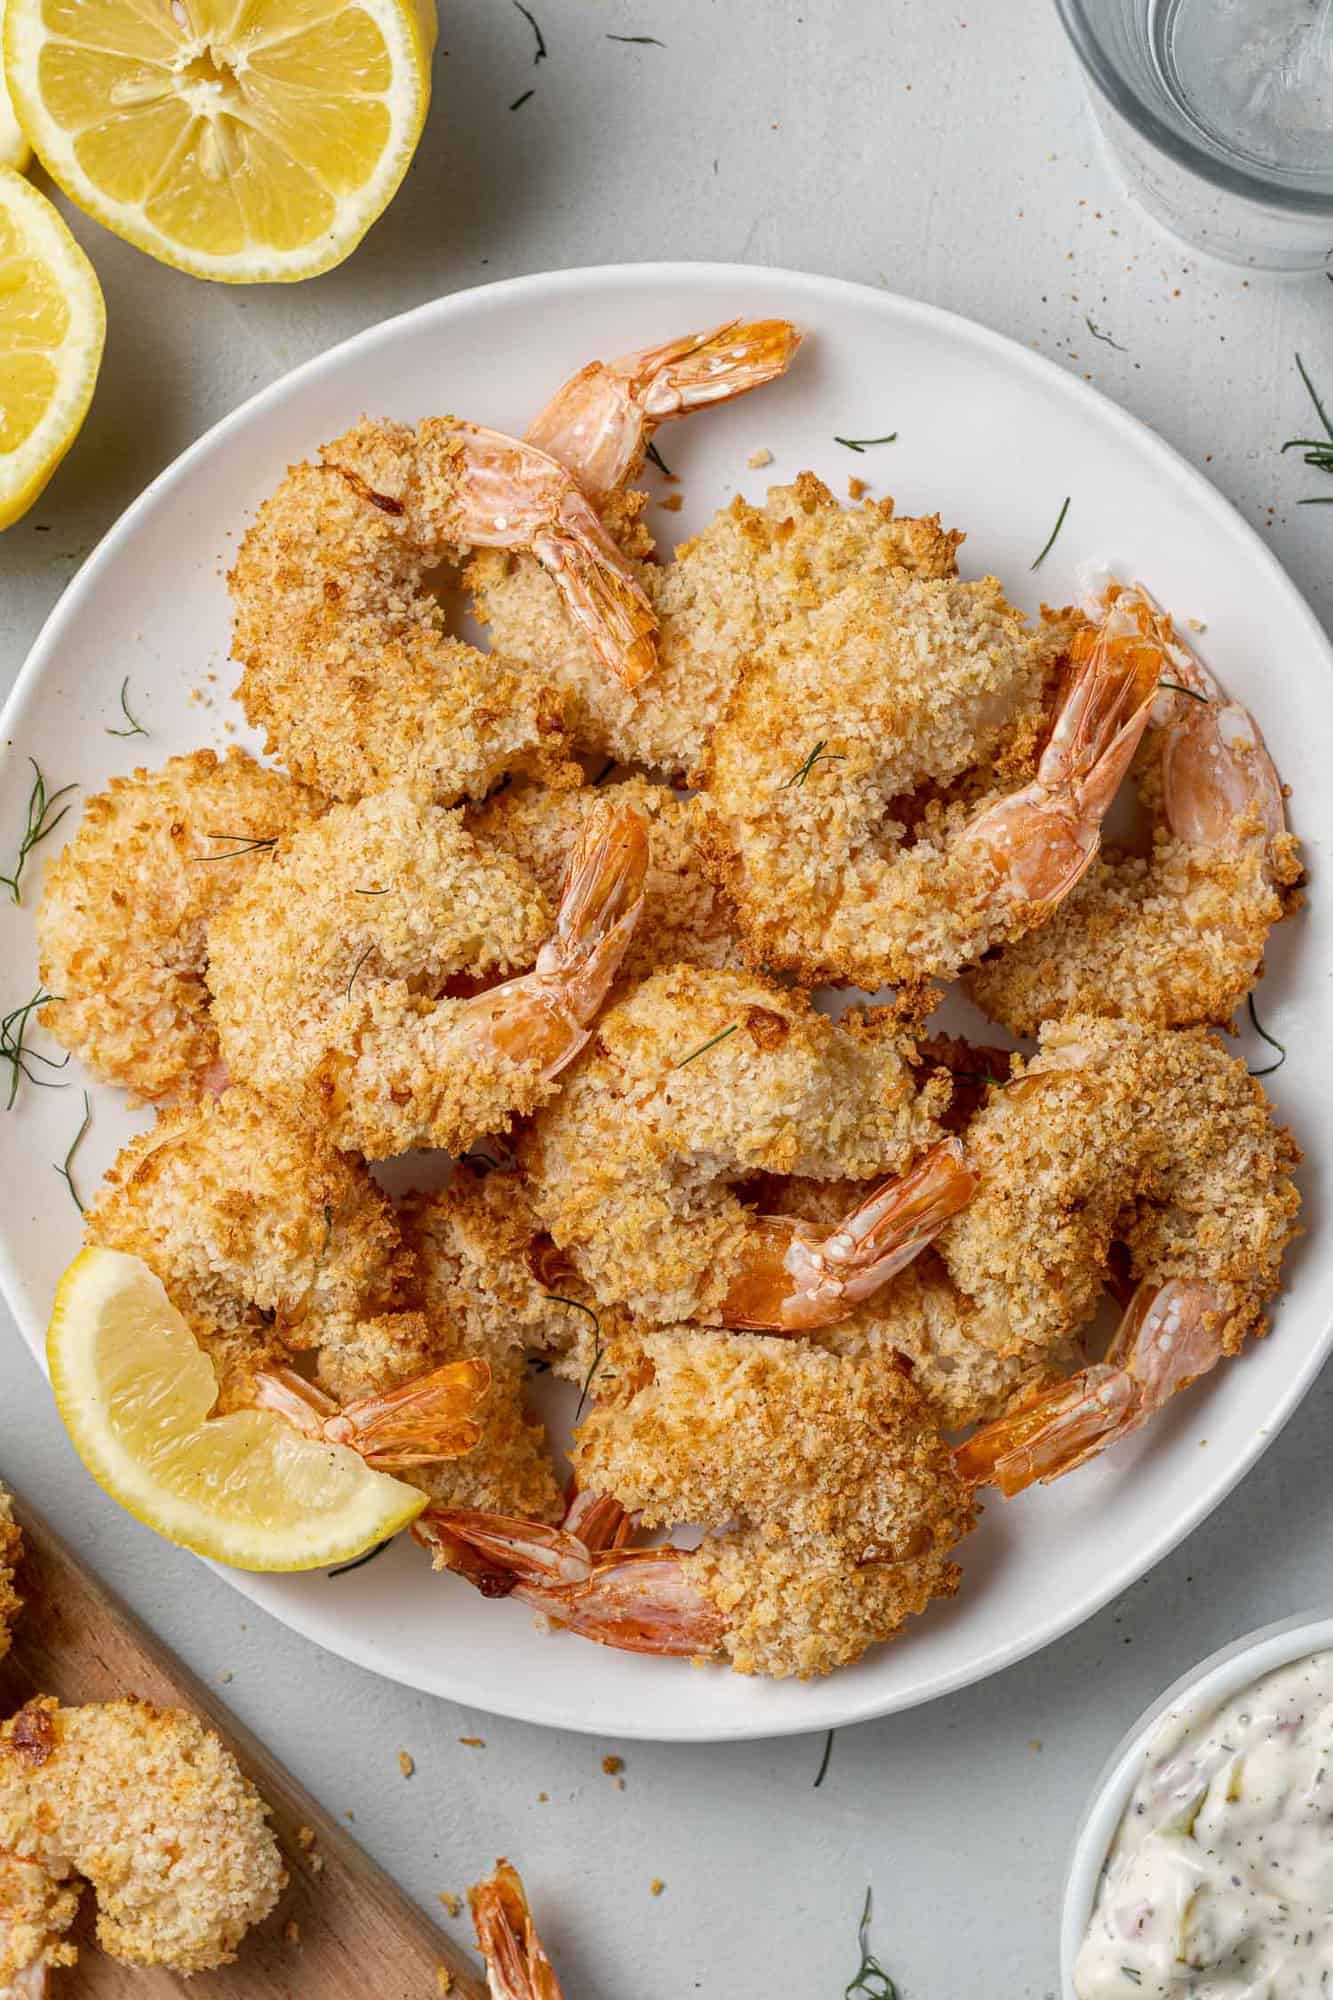 Cooked breaded shrimp piled on a plate.